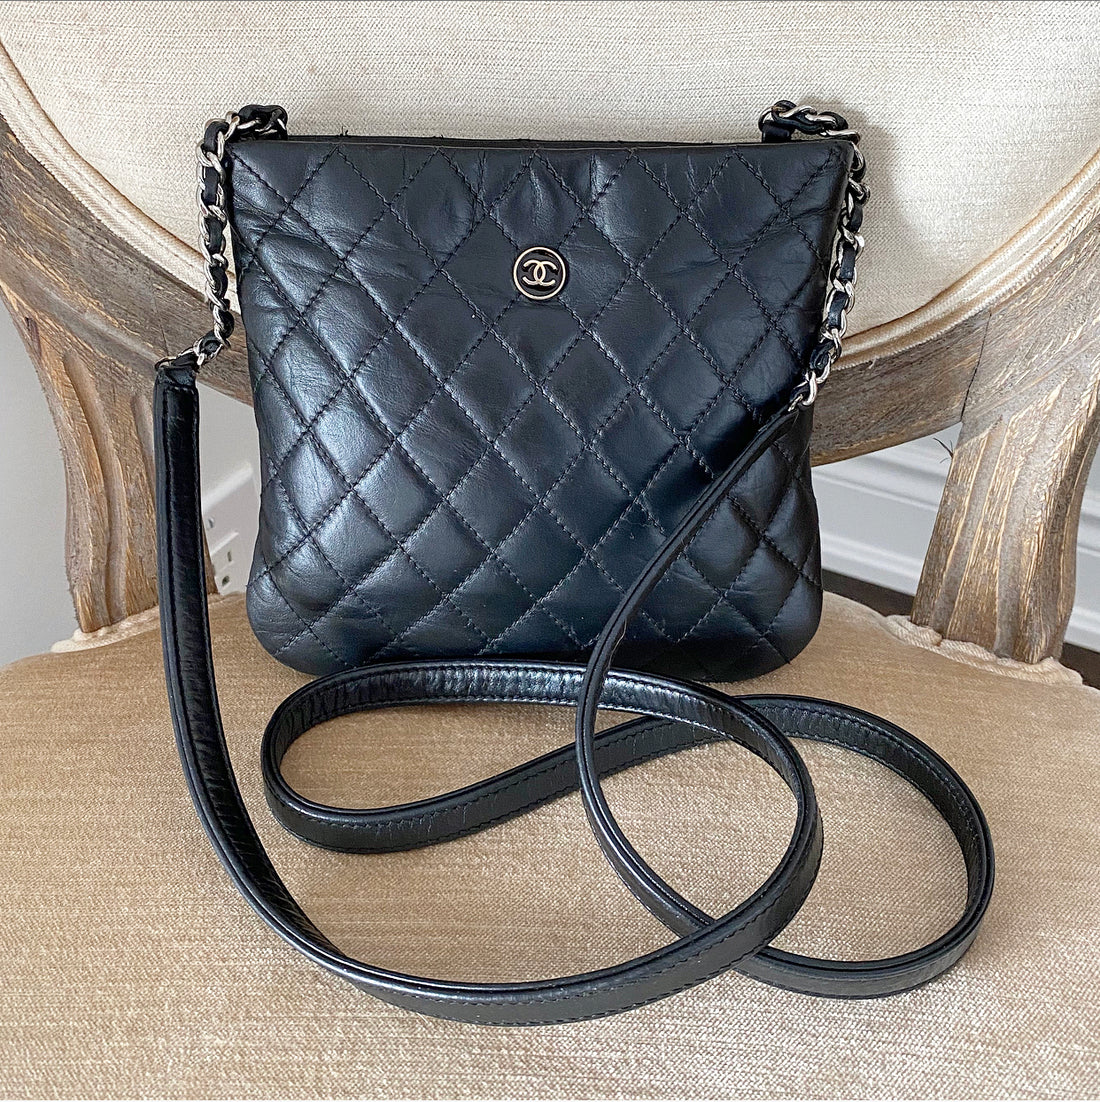 quilting chanel purses